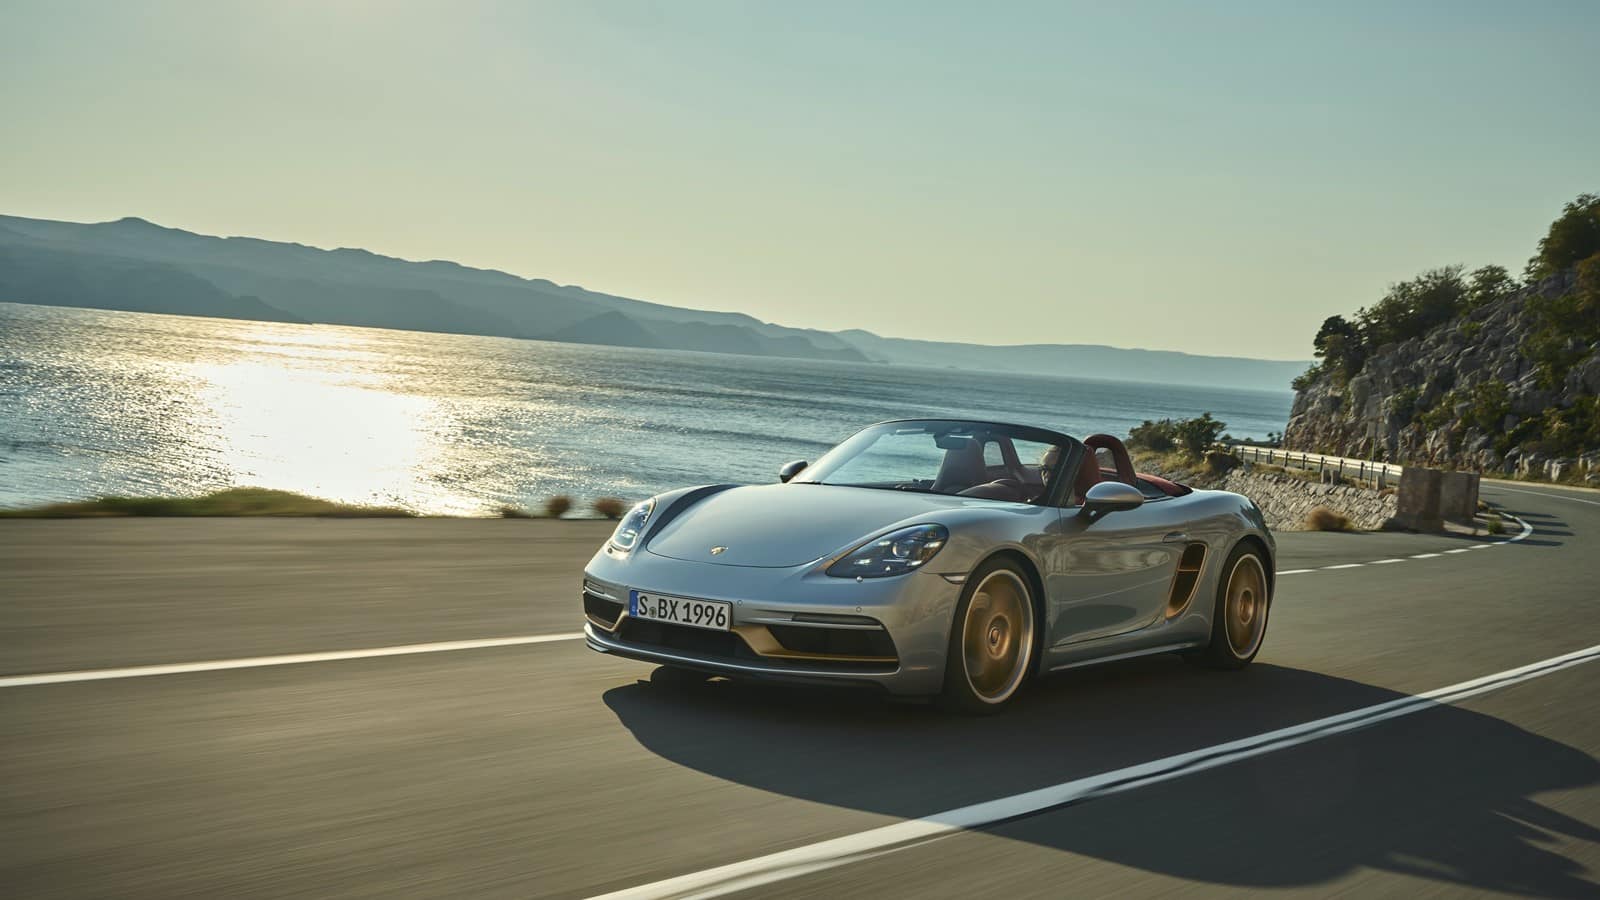 The Boxster turns 25 and Porsche celebrates it with a special edition